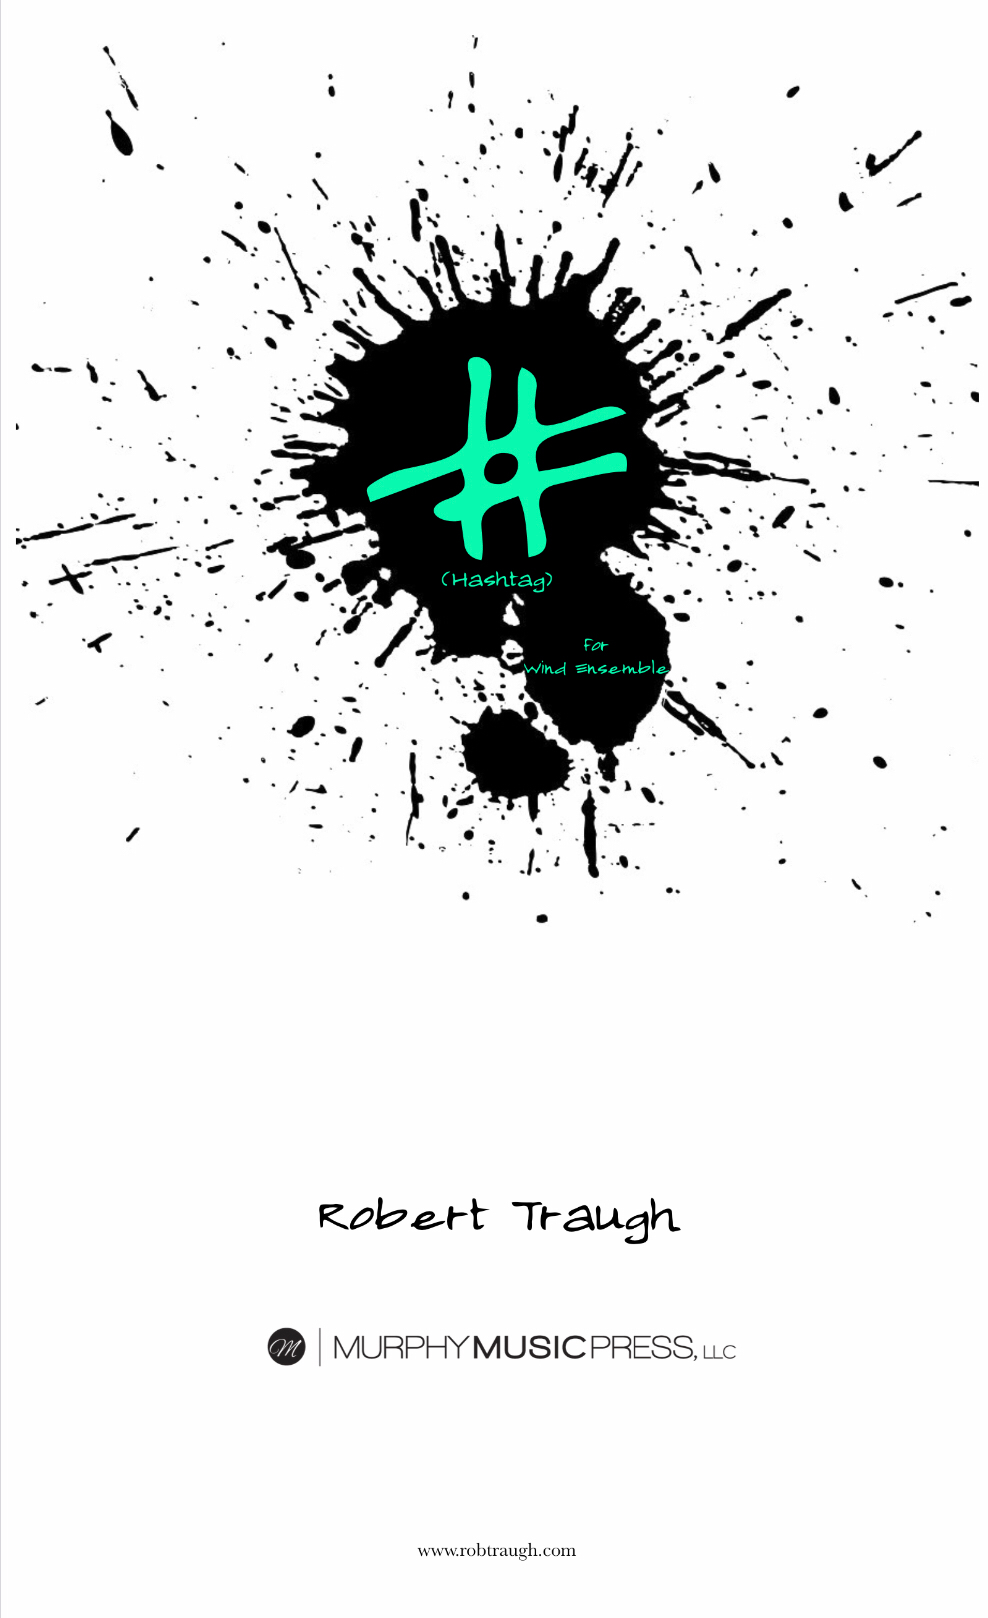 Hashtag (Score Only) by Rob Traugh